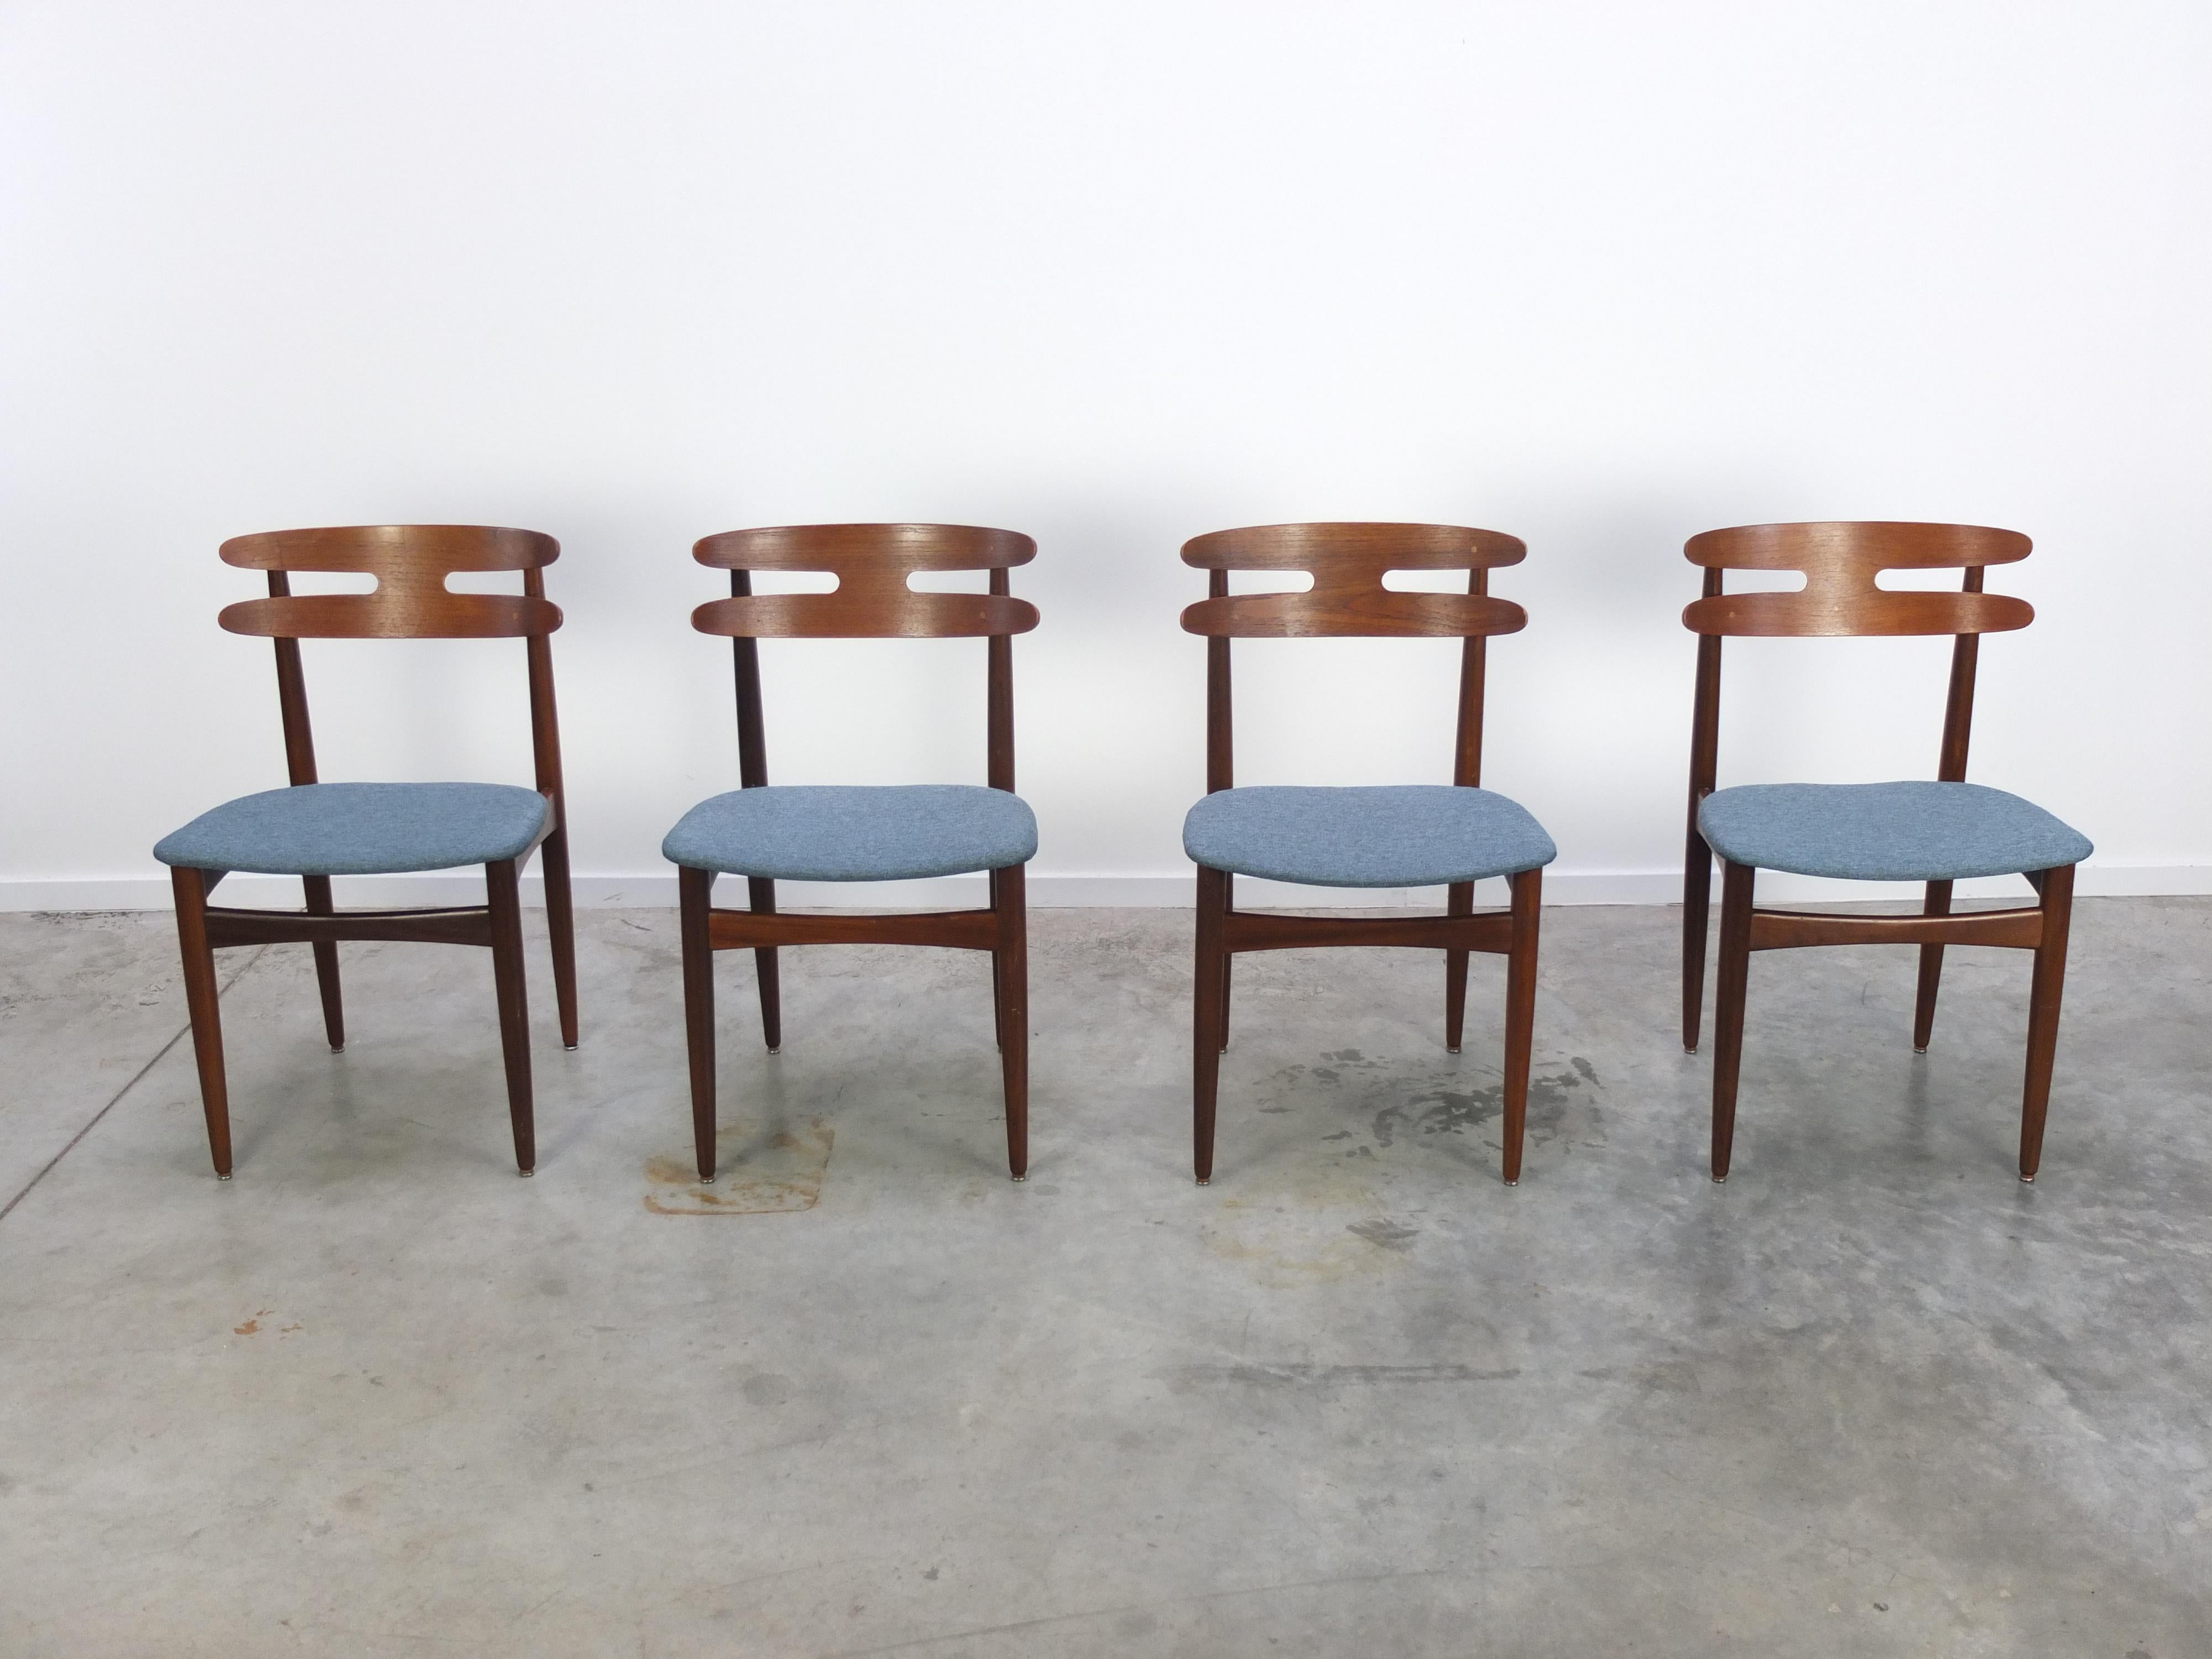 Brass Set of 4 Teak 'Model 178' Dining Chairs by Johannes Andersen for Bramin, 1960s For Sale